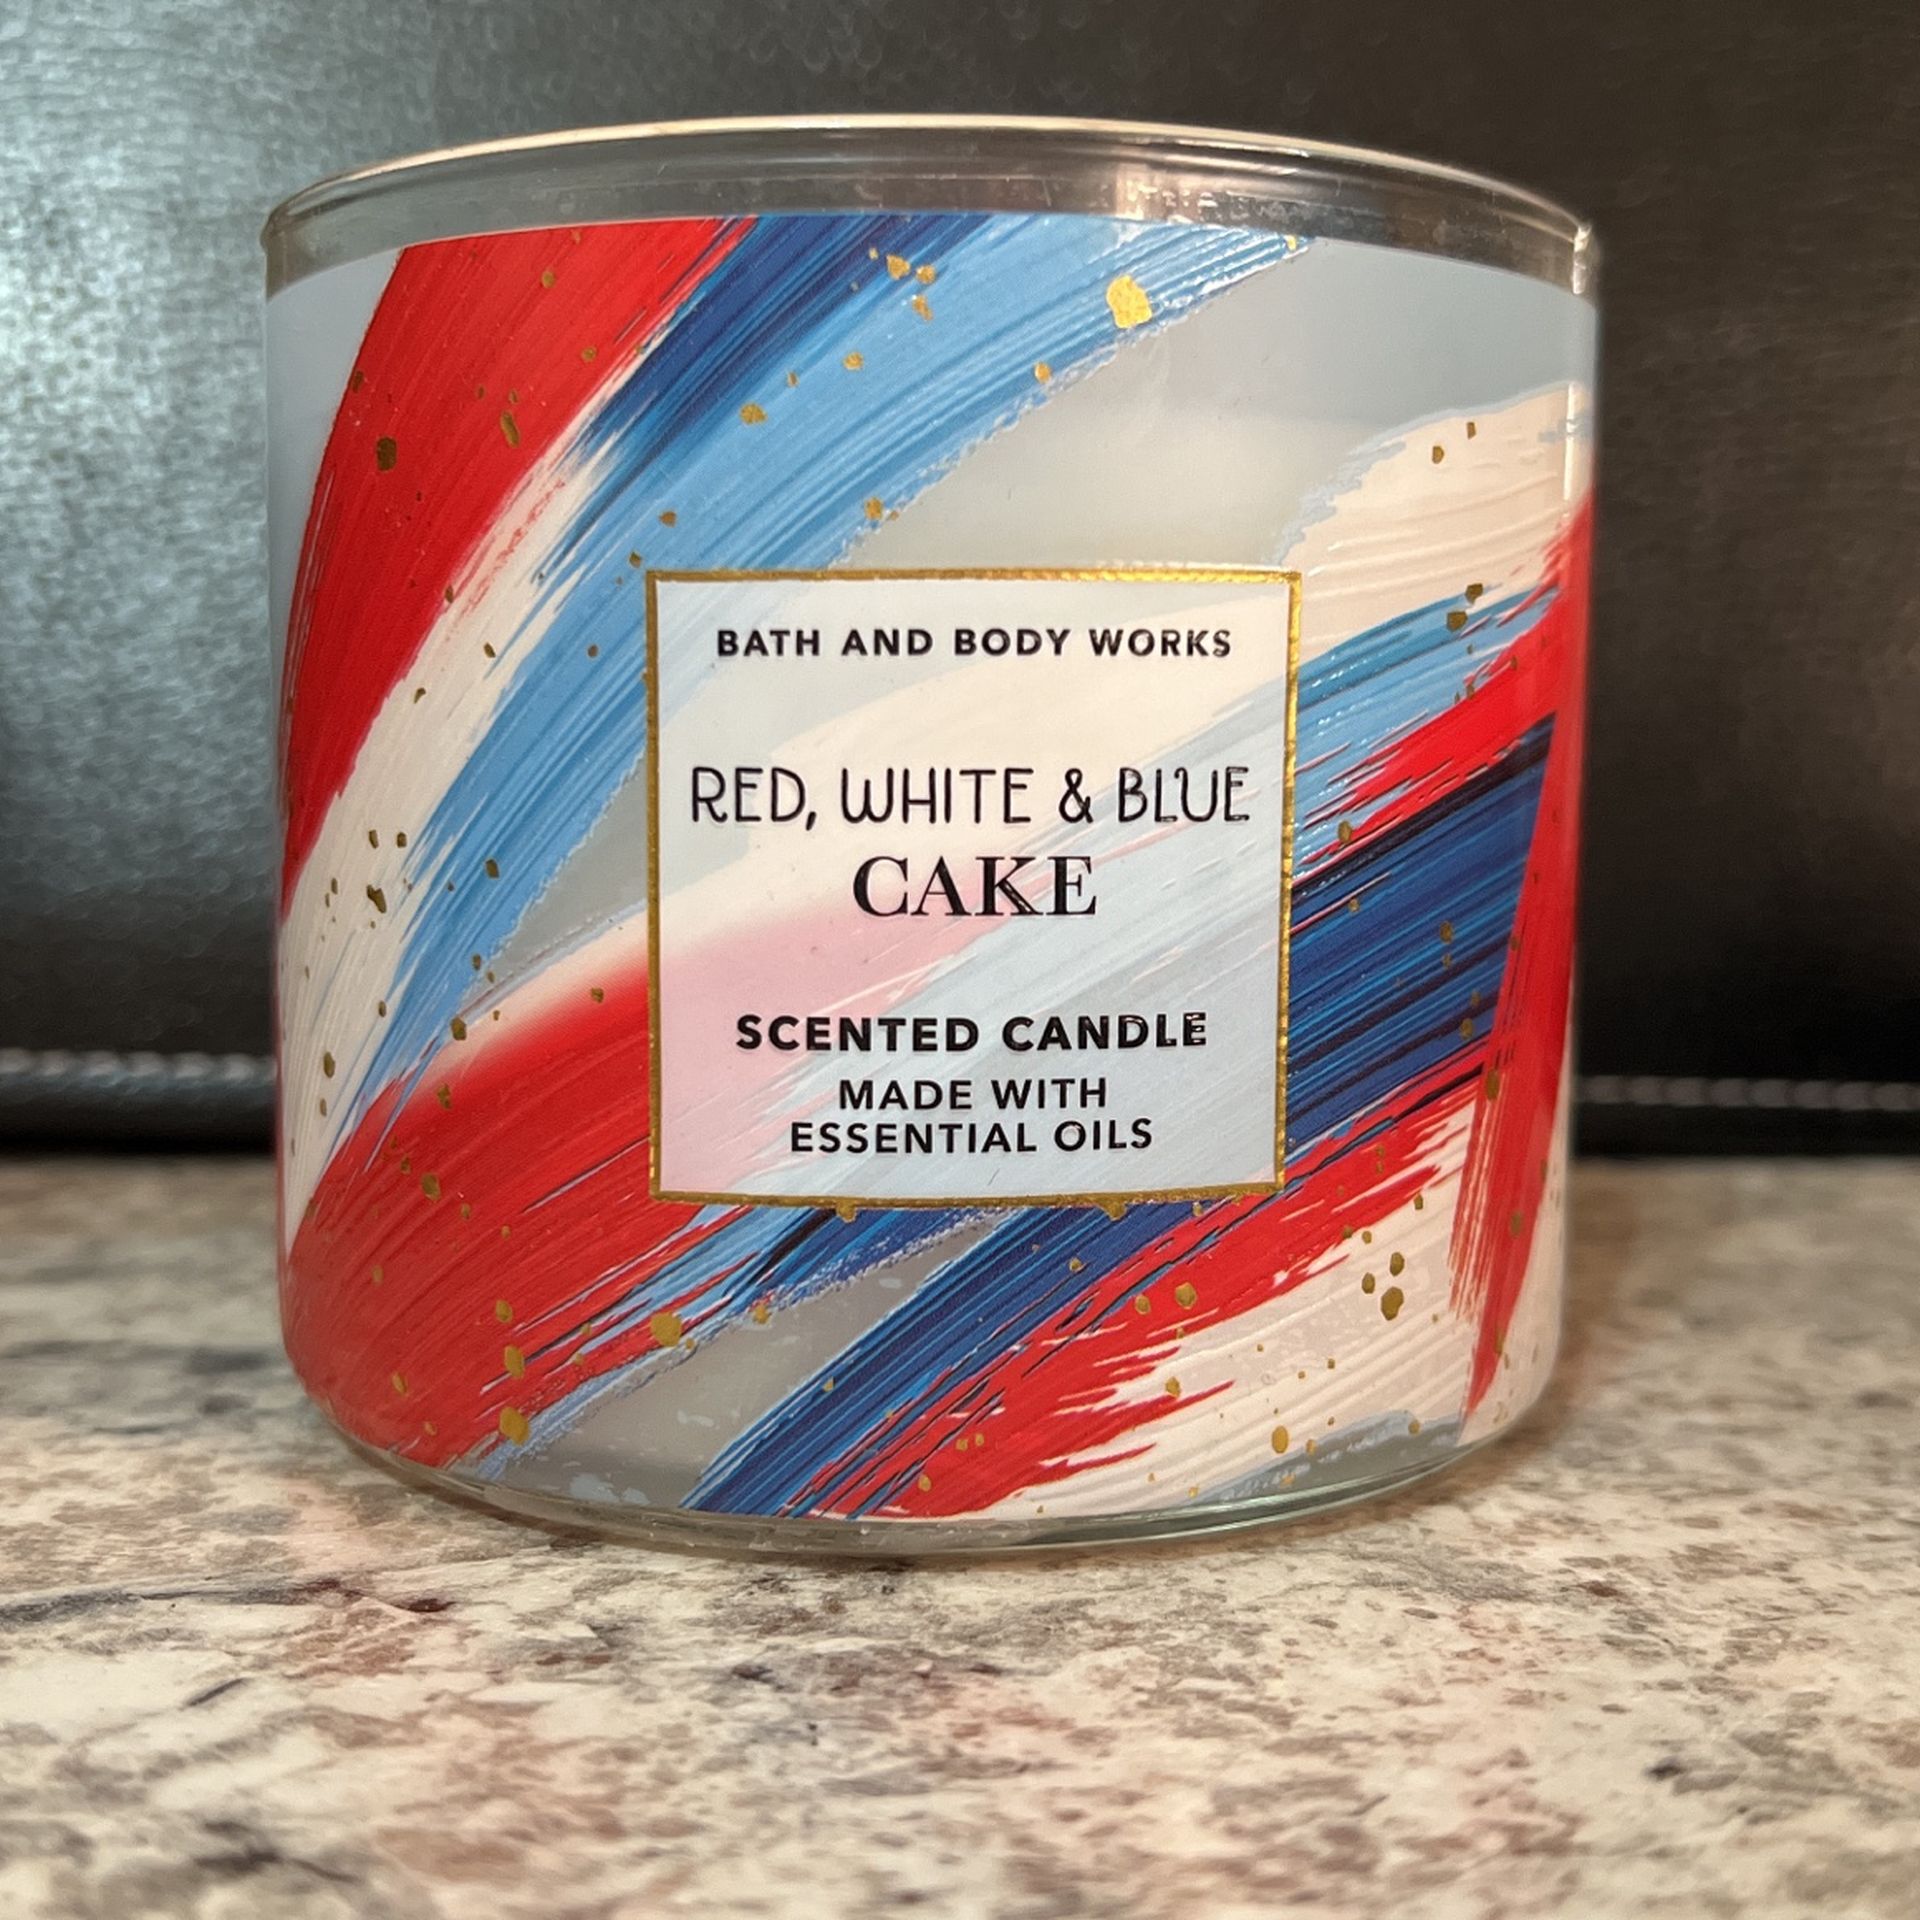 2 For $20. Or 1 For $13.  Bath And Bodyworks, Red White And Blue Cake Scented Candle Made With Essential Oils Three Wick